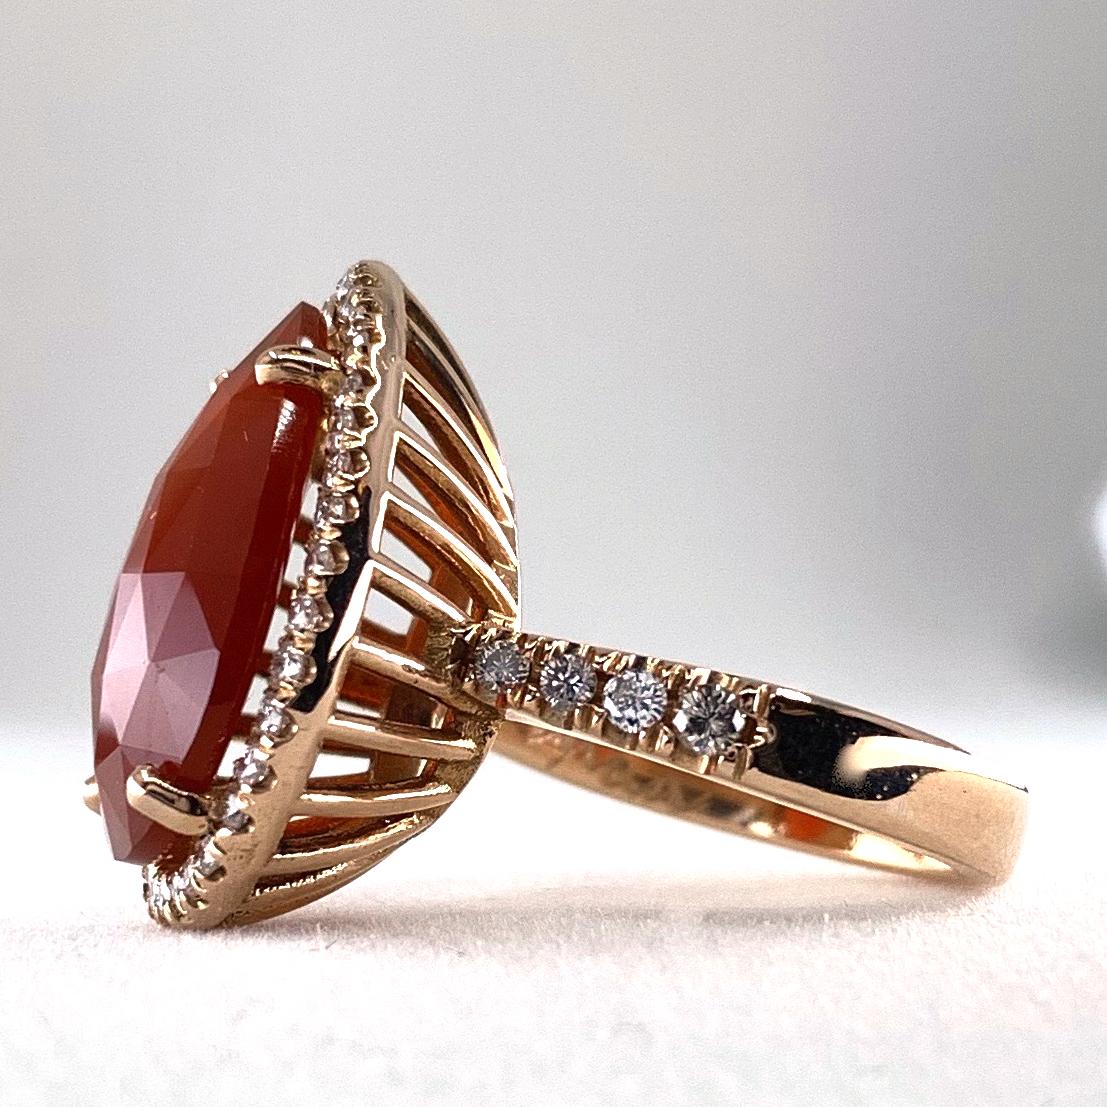 Faceted 4.0 Carat Carnelian Slice Pear-Shaped Diamond Halo Ring in Rose Gold 3